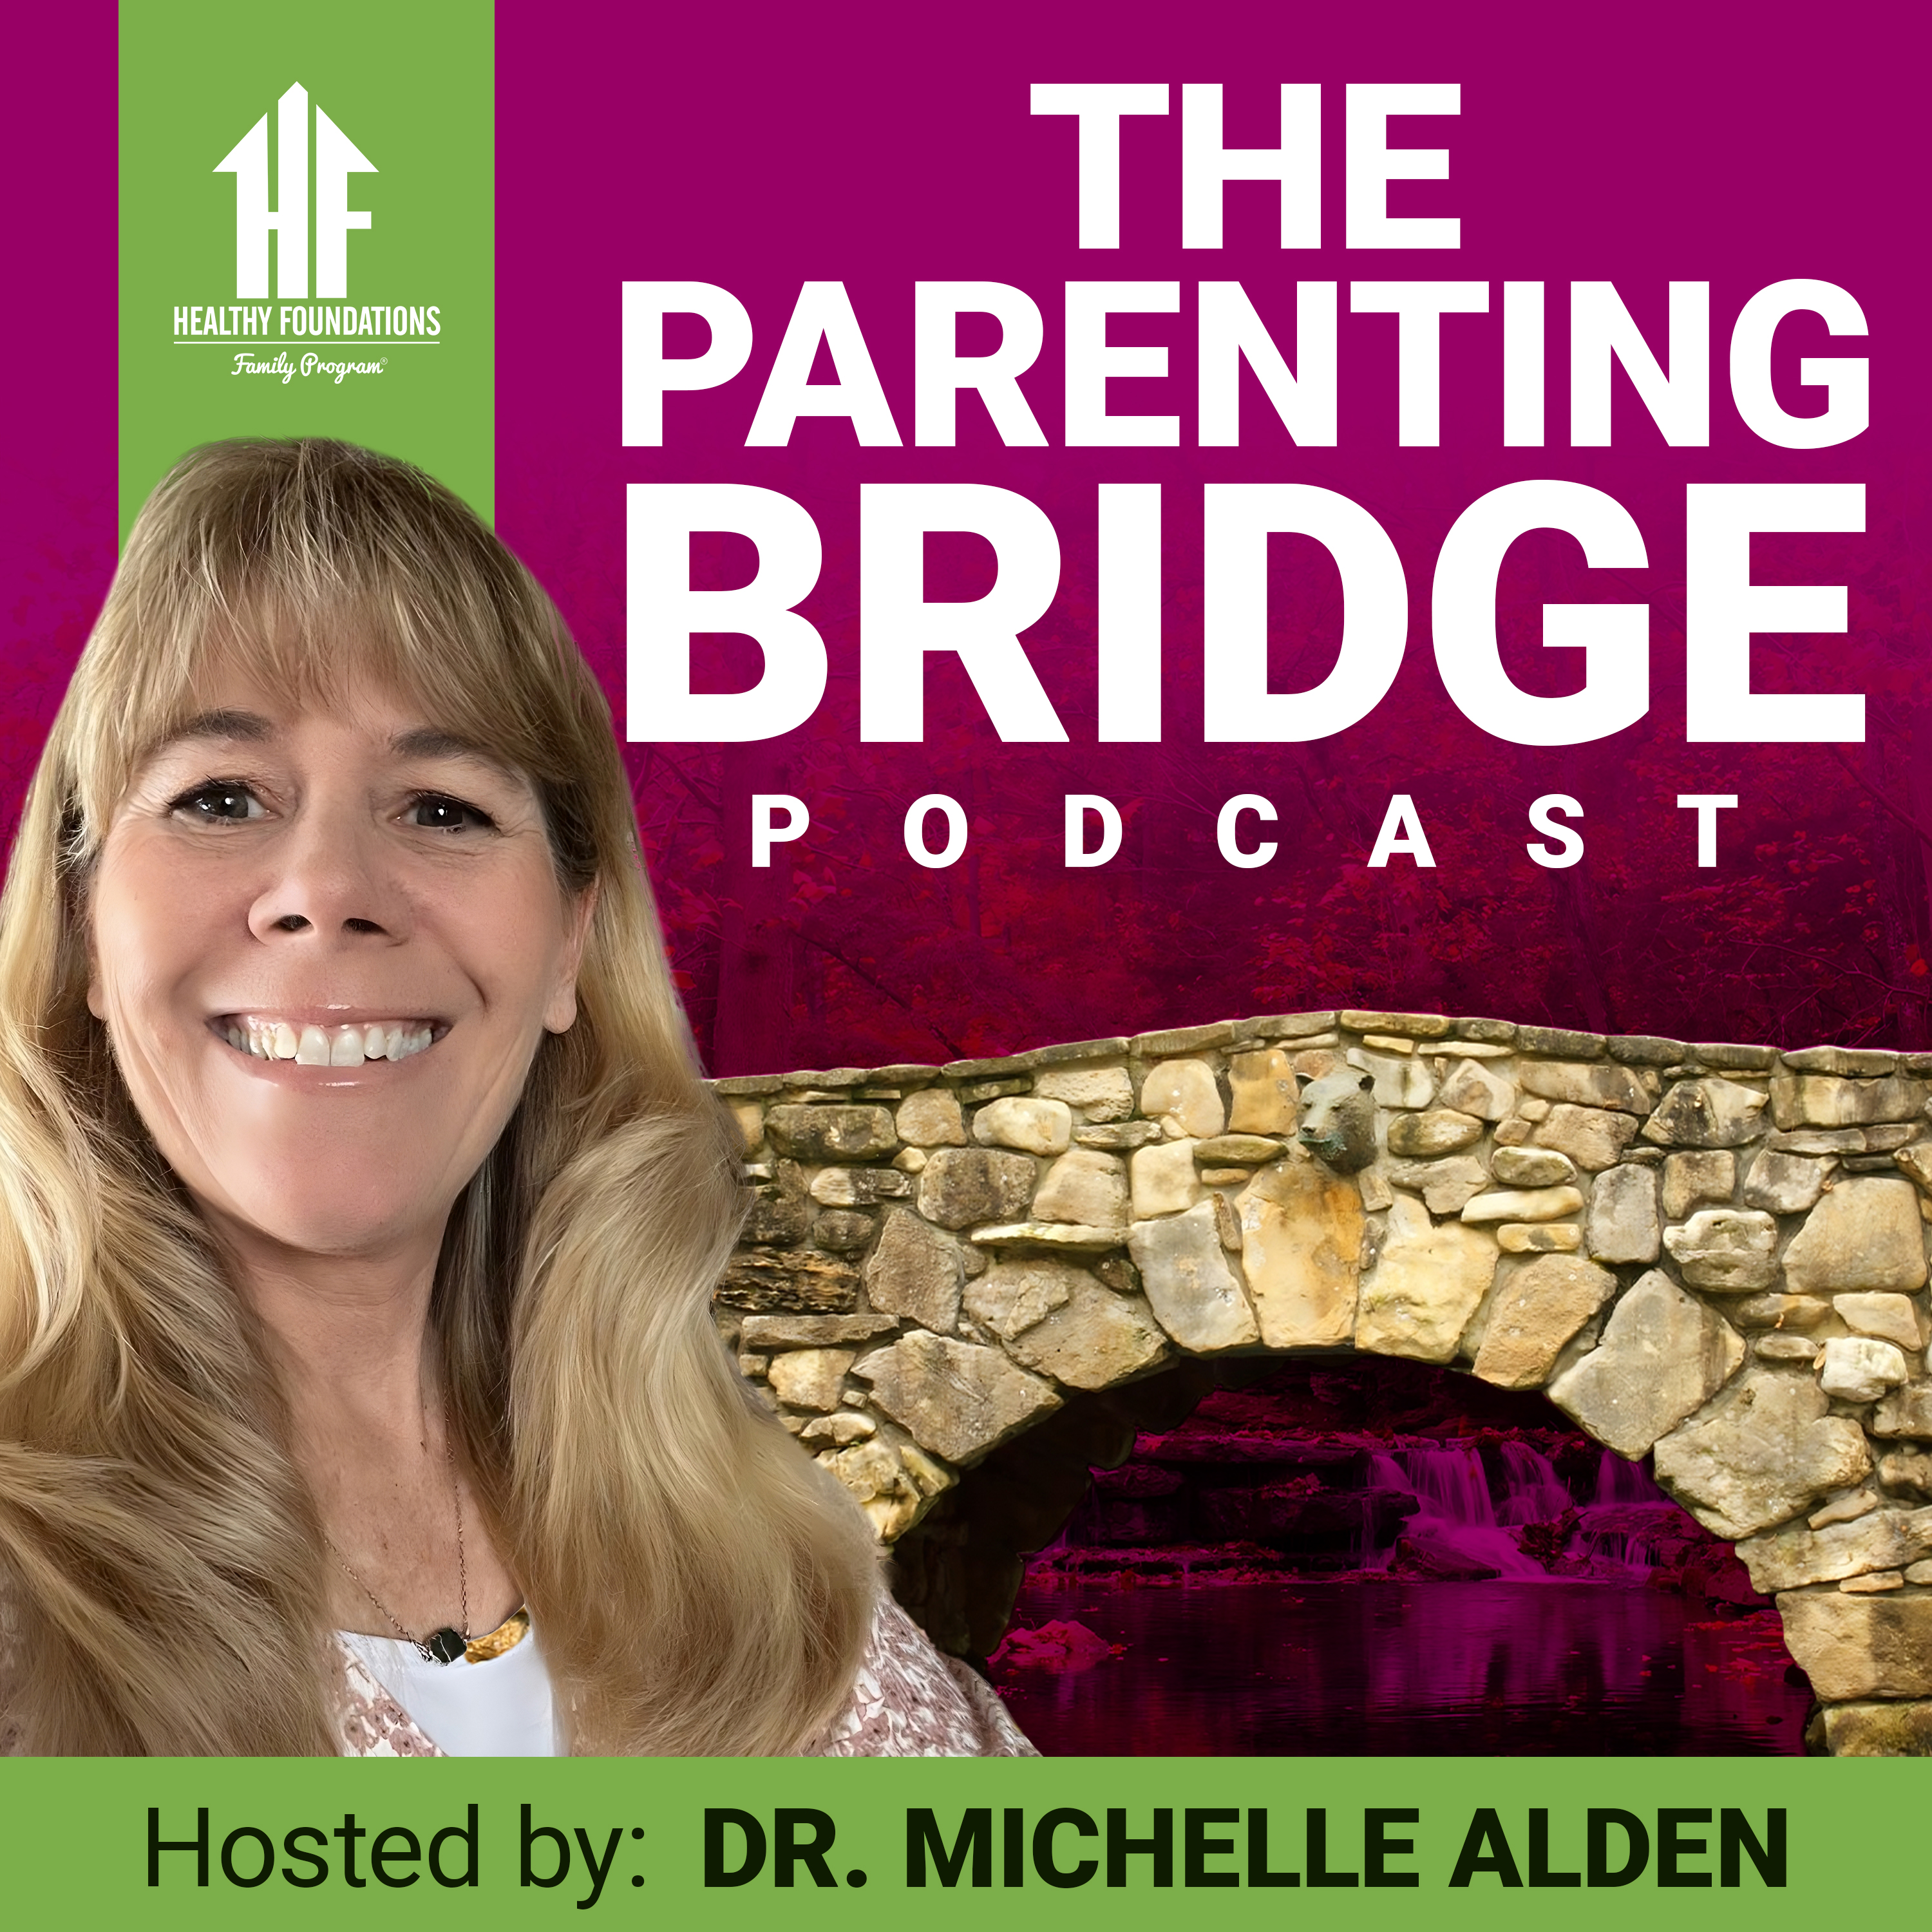 Why to teach and train versus punish? | Parenting tips by Dr. Michelle Alden